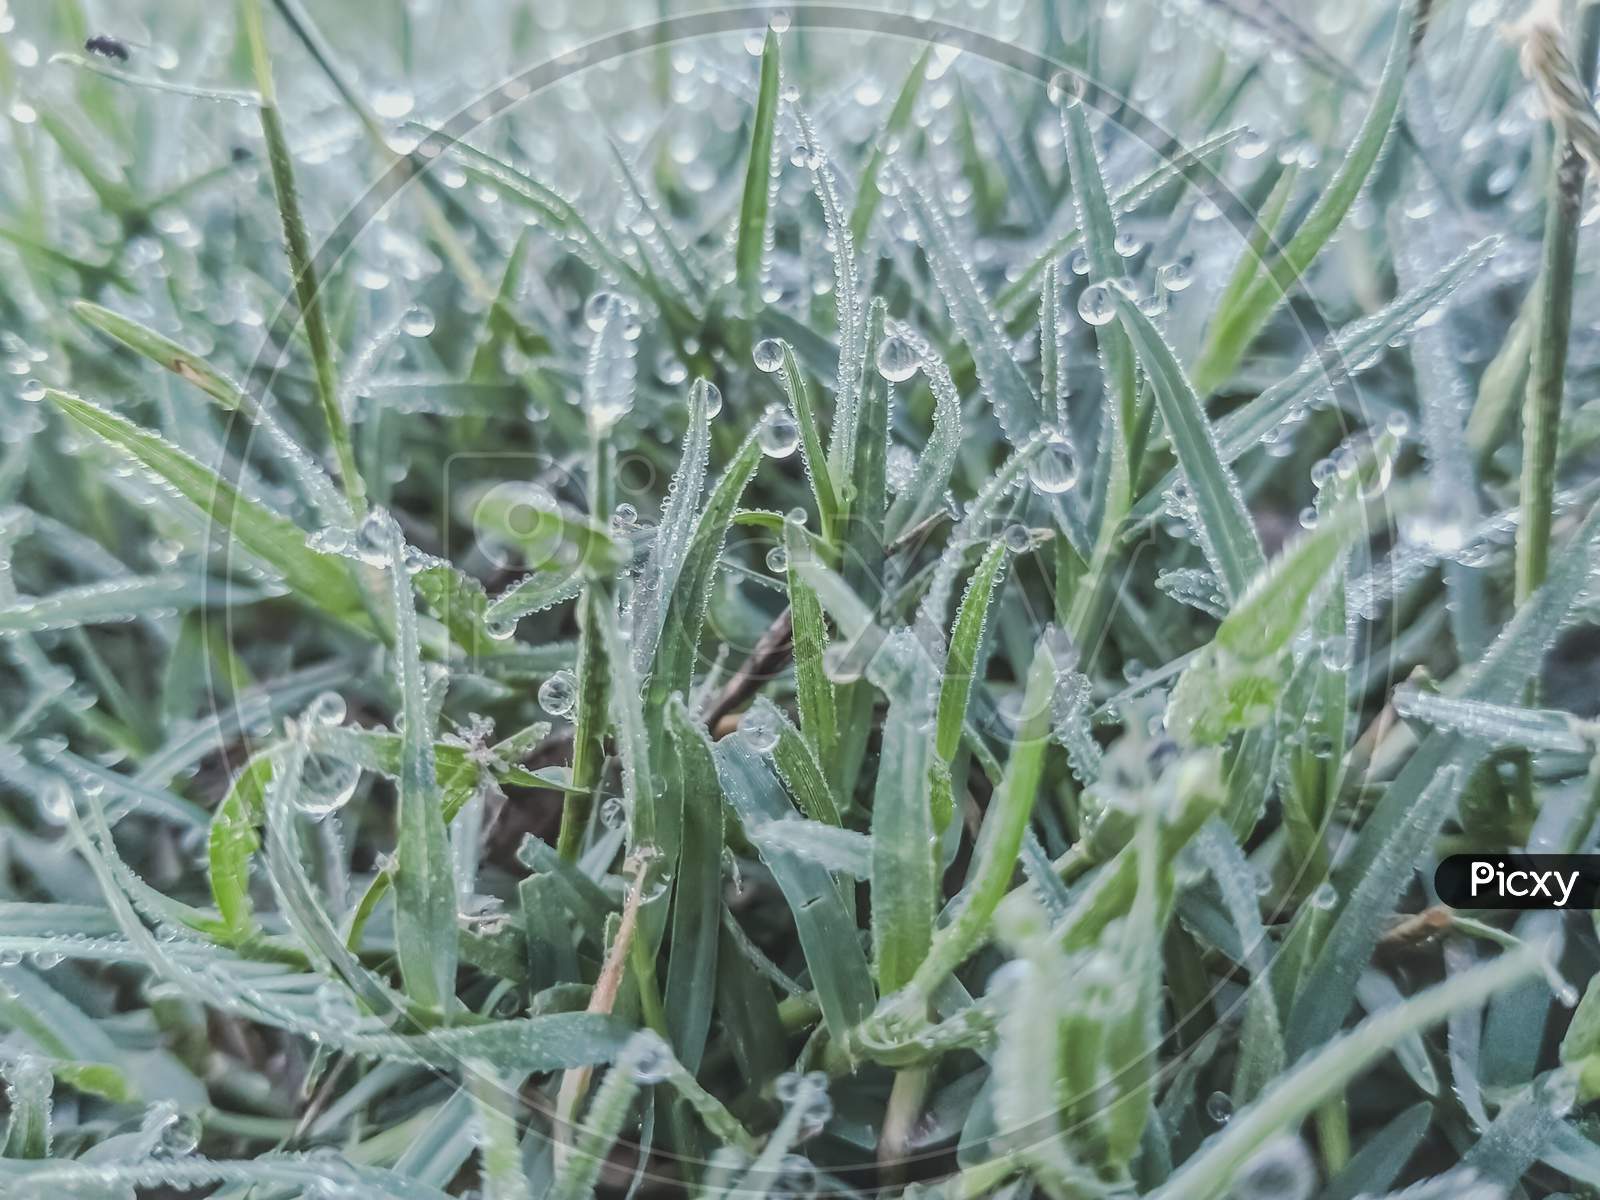 Dewdrops on the grass at morning.